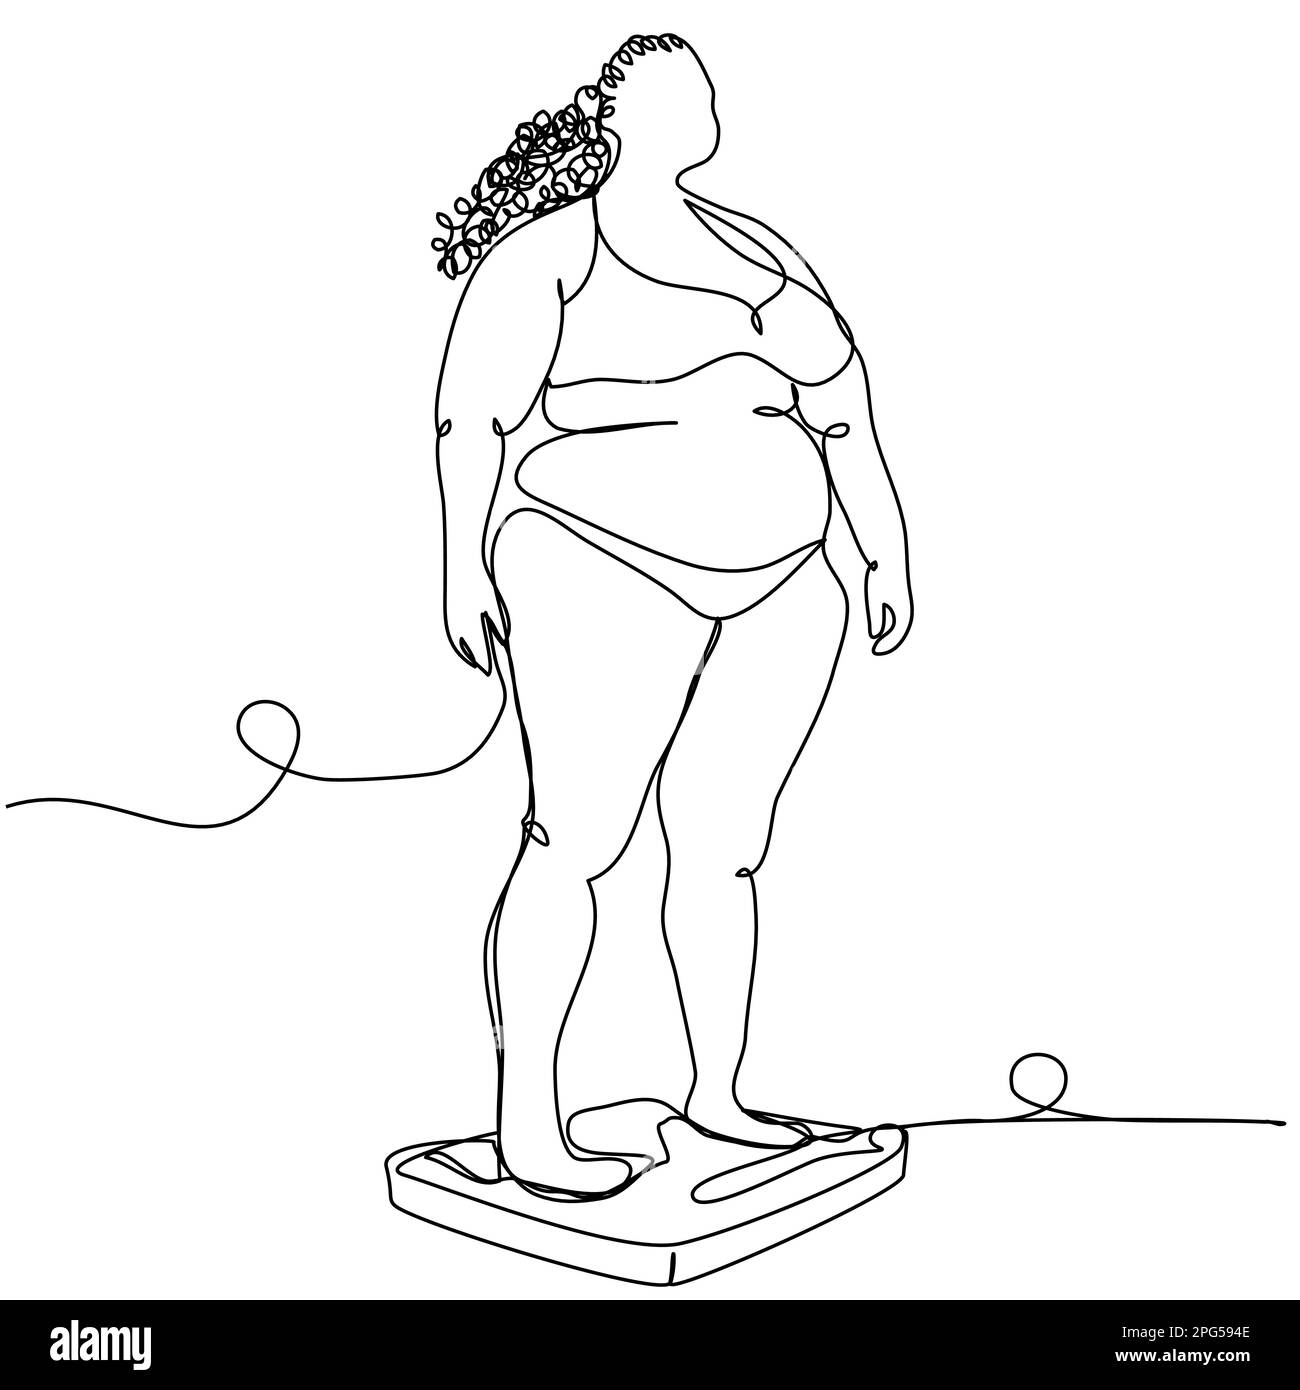 An overweight woman stands on the scales in one line on a white background.  Stock Vector